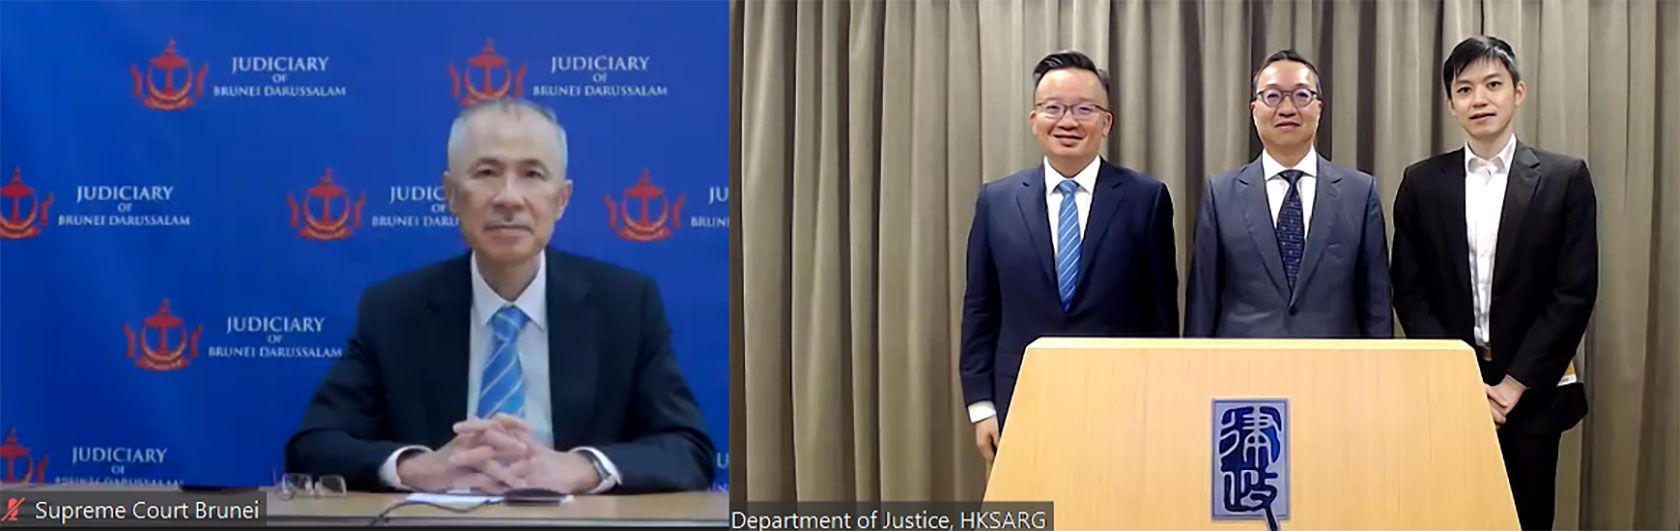 The Department of Justice and the Supreme Court of Brunei Darussalam have facilitated the organisation of an online seminar co-organised by the AALCO Hong Kong Regional Arbitration Centre and the eBRAM International Online Dispute Resolution Centre (eBRAM Centre) today (June 27). Photo shows the Secretary for Justice, Mr Paul Lam, SC (second right), and the Chief Justice of the Supreme Court of Brunei Darussalam, Dato Seri Paduka Steven Chong Wan Oon (first left), with the speakers the Director of the AALCO Hong Kong Regional Arbitration Centre, Mr Nick Chan (third right), and the ODR Director of eBRAM Centre, Mr Jacob Sin (first right).